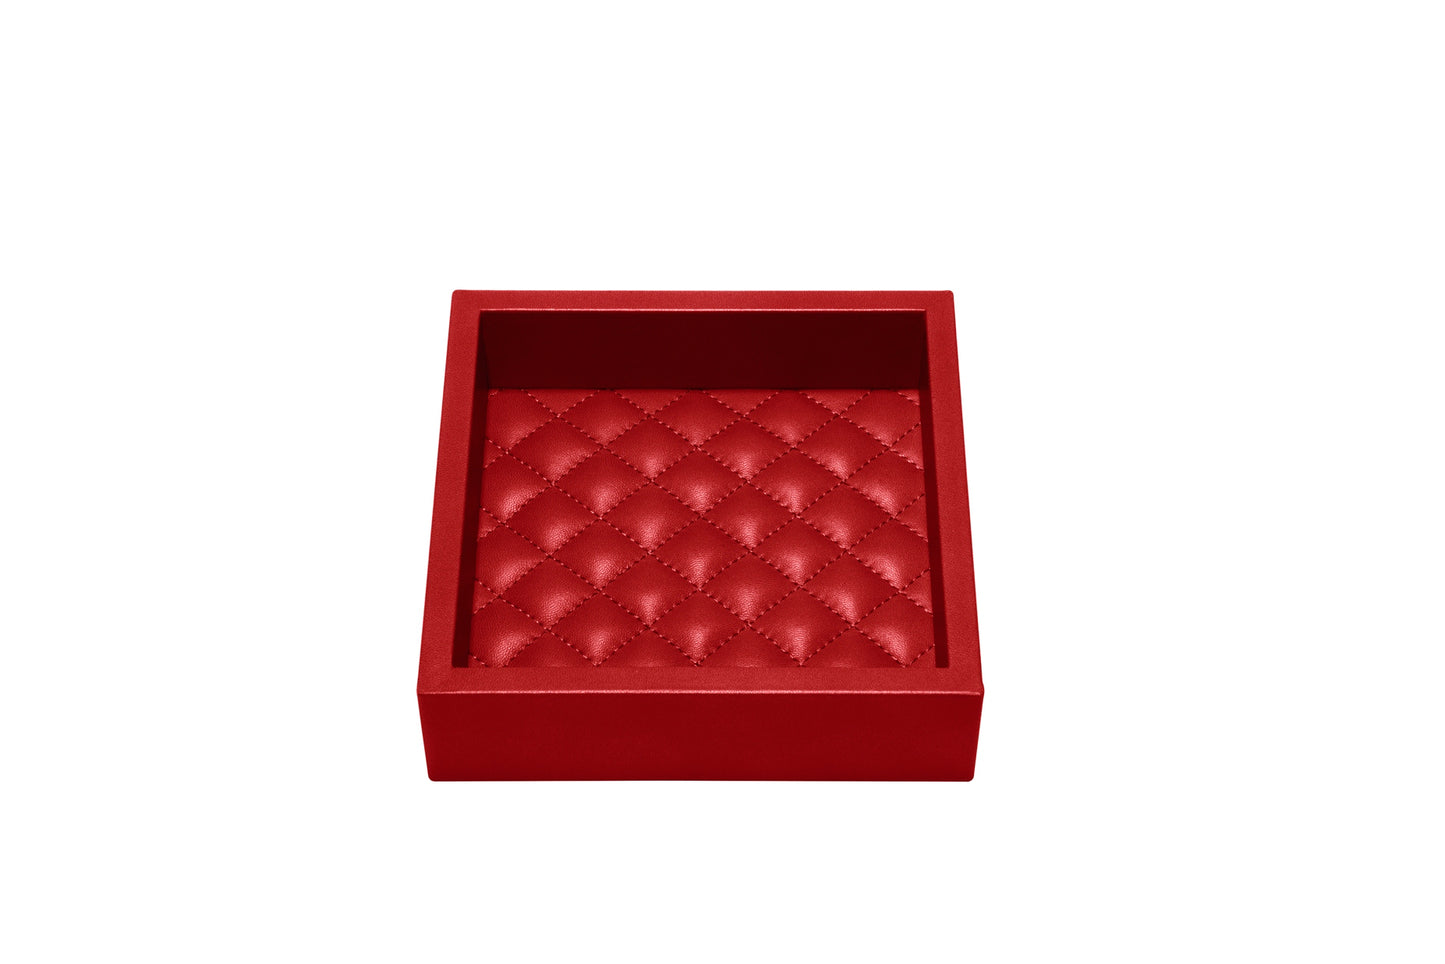 Febe Leather Quilted Diamonds Valet Tray Square